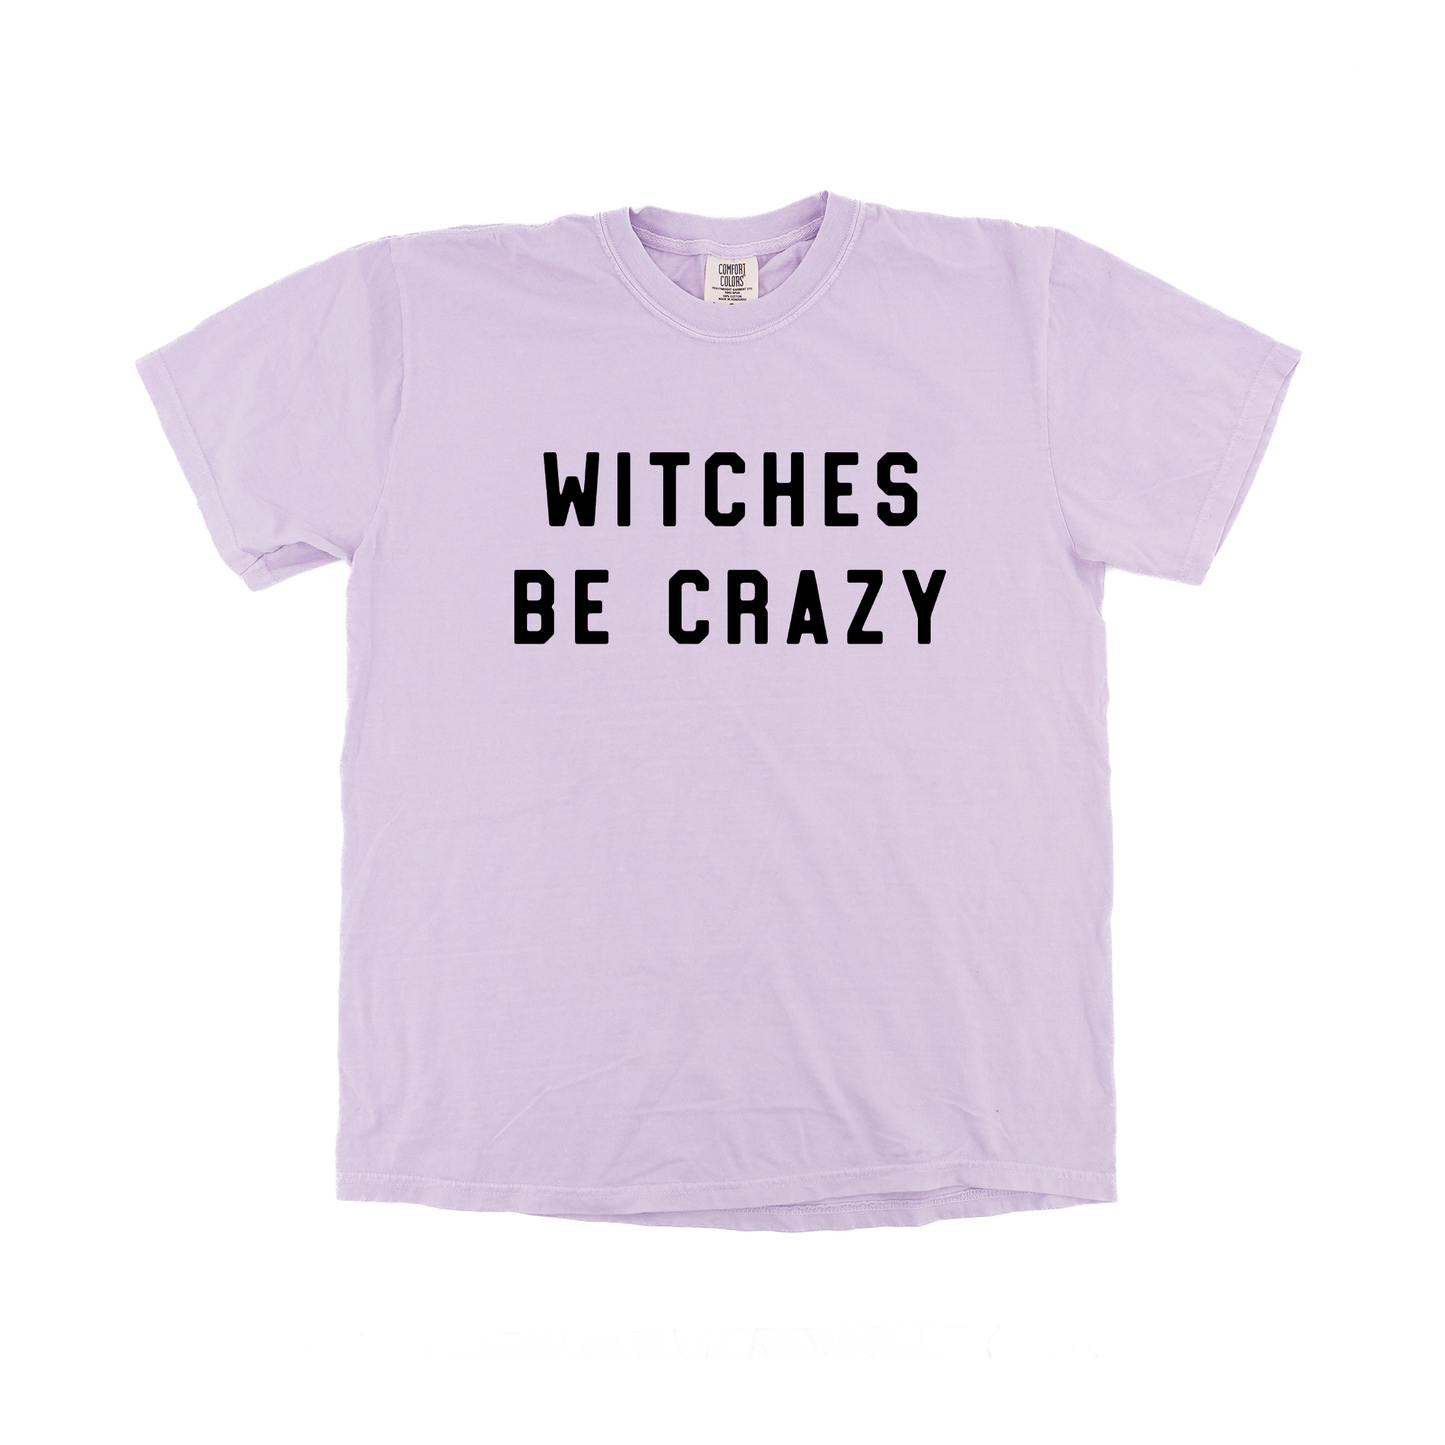 Witches Be Crazy (Black) - Tee (Pale Purple)